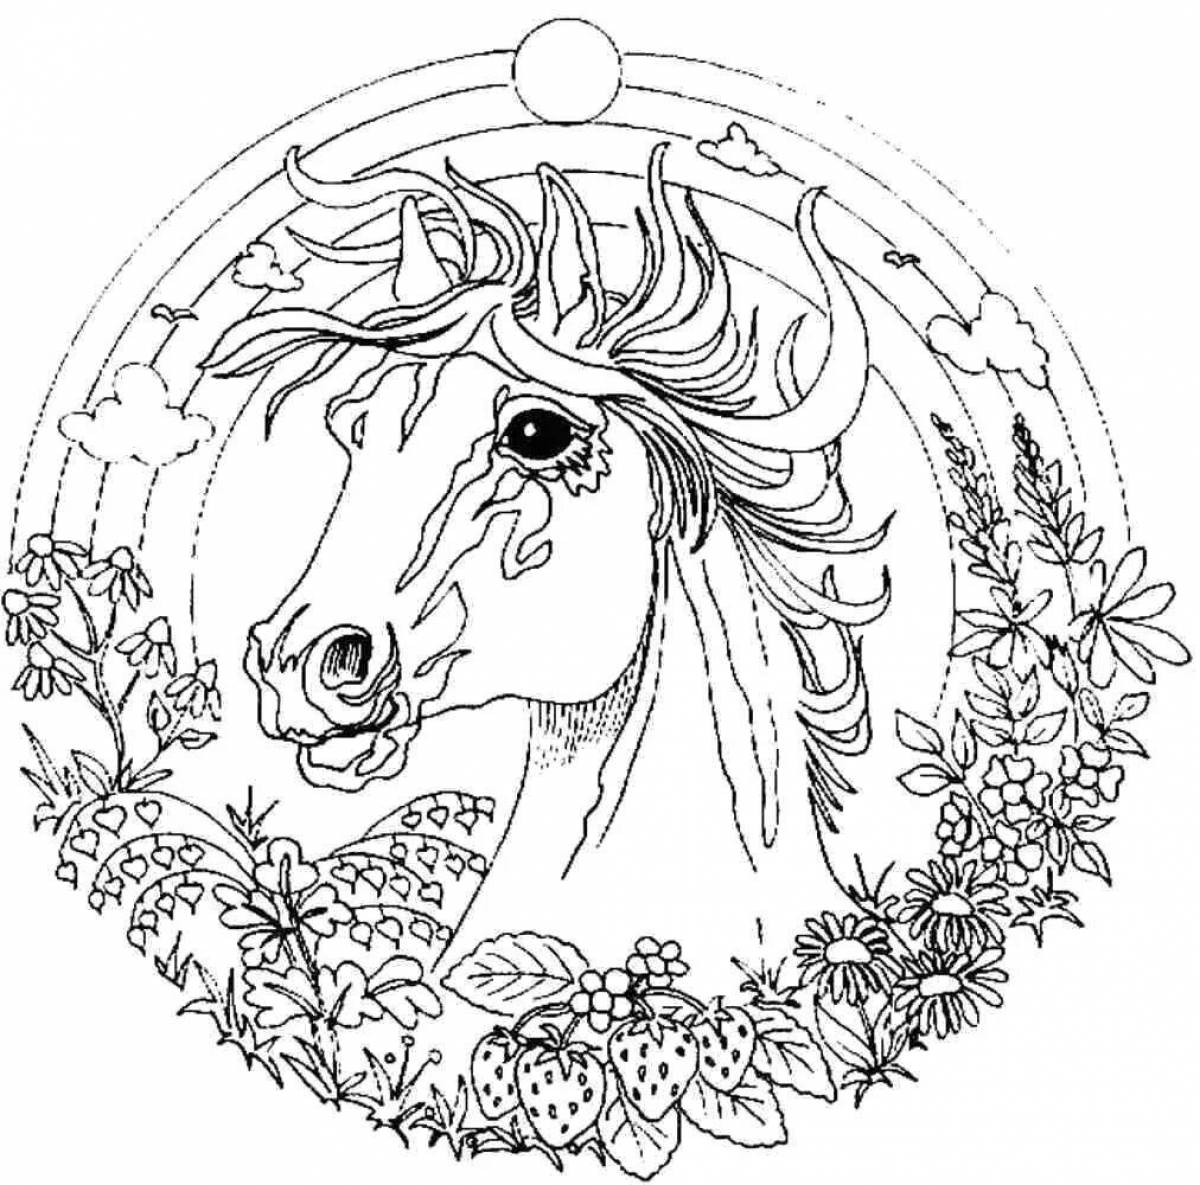 Great coloring page is very beautiful